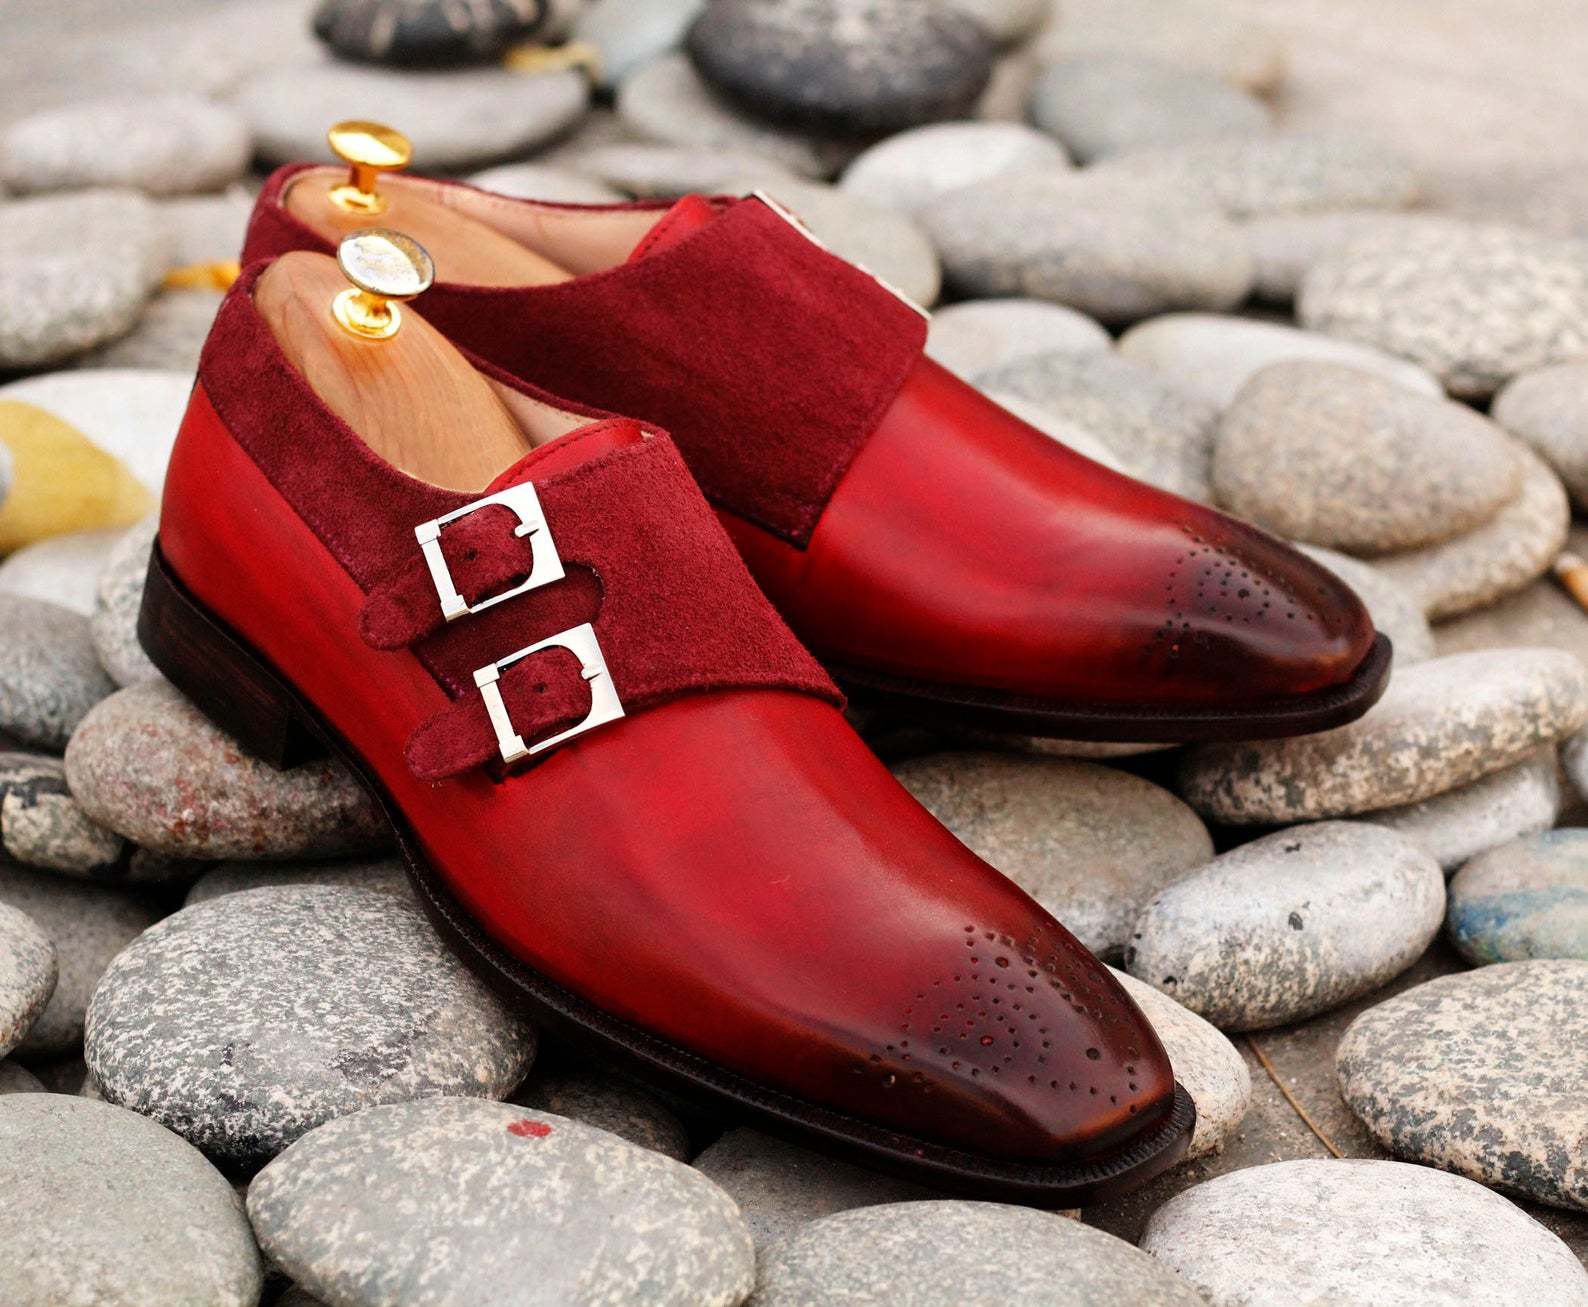 New Handmade Pure Leather Suede Burgundy Double Monk Strap Brogue Toe Dress Shoe